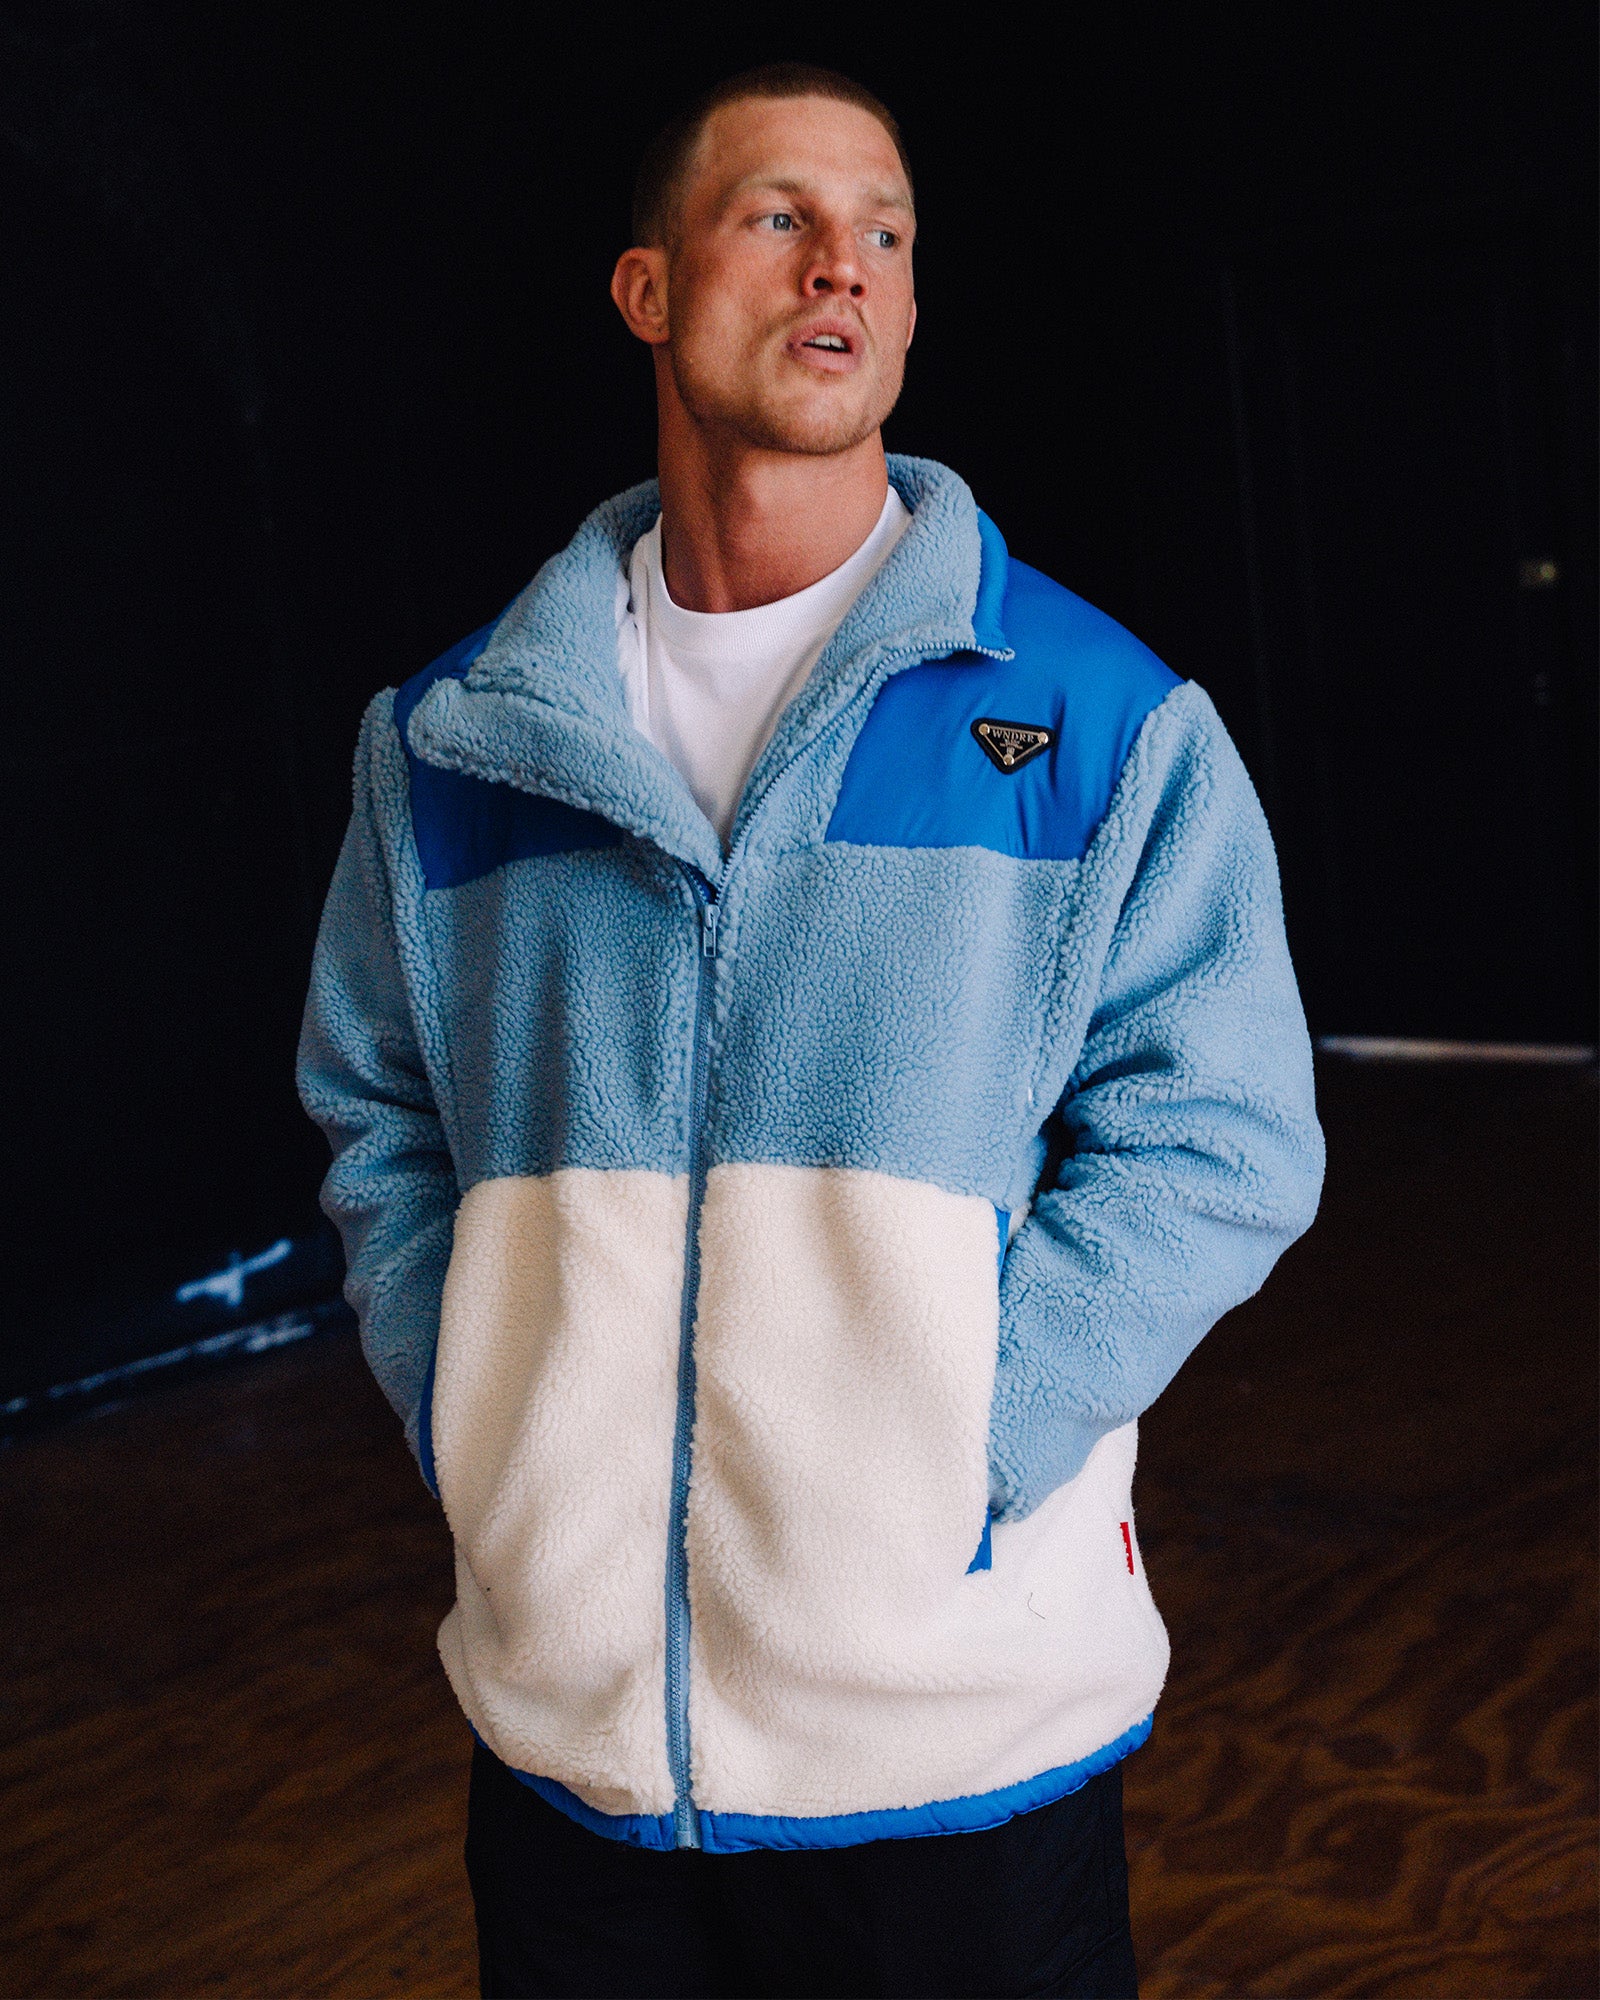 PARLAY SHERPA JACKET - BLUE/OFF WHITE